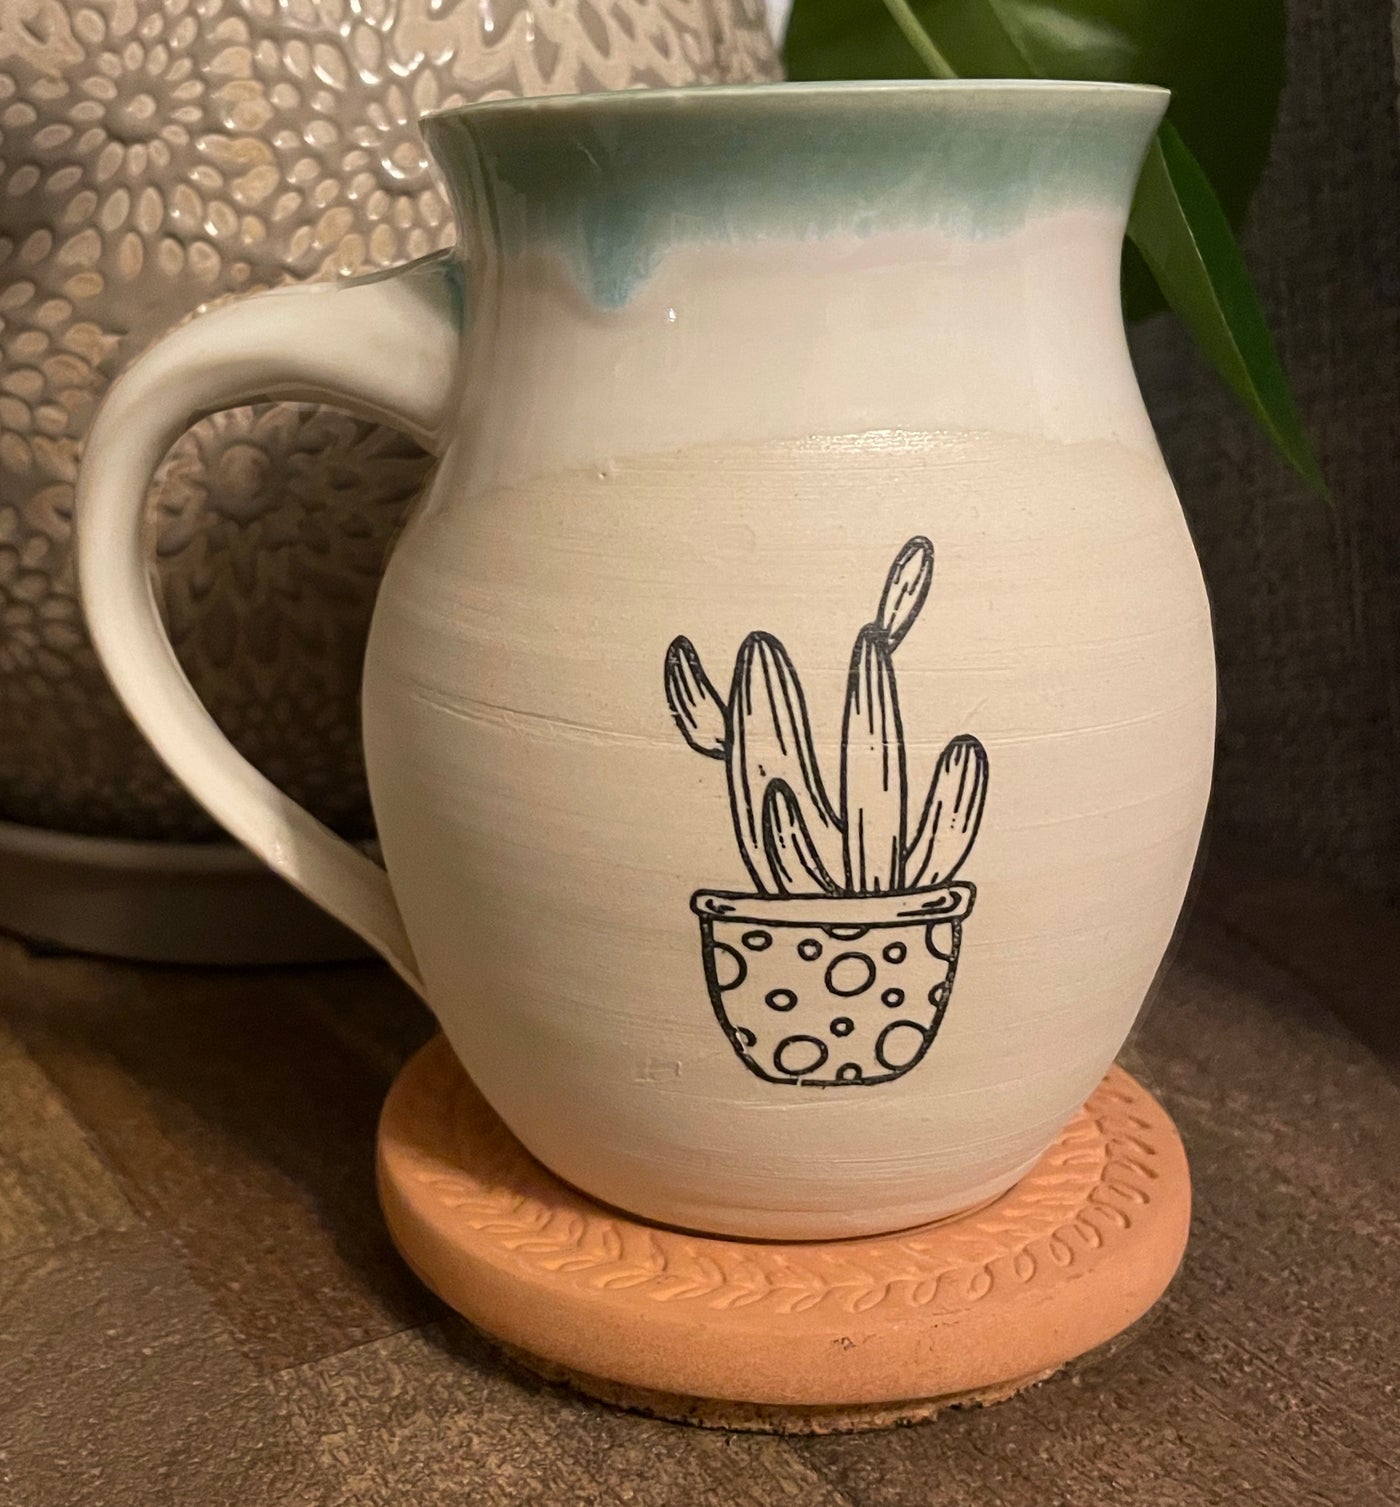 G5 These small batch, handmade mugs are available in blue or green. Each mug is stamped with a unique plant design. Explore the best and coolest gift ideas for plant enthusiasts!